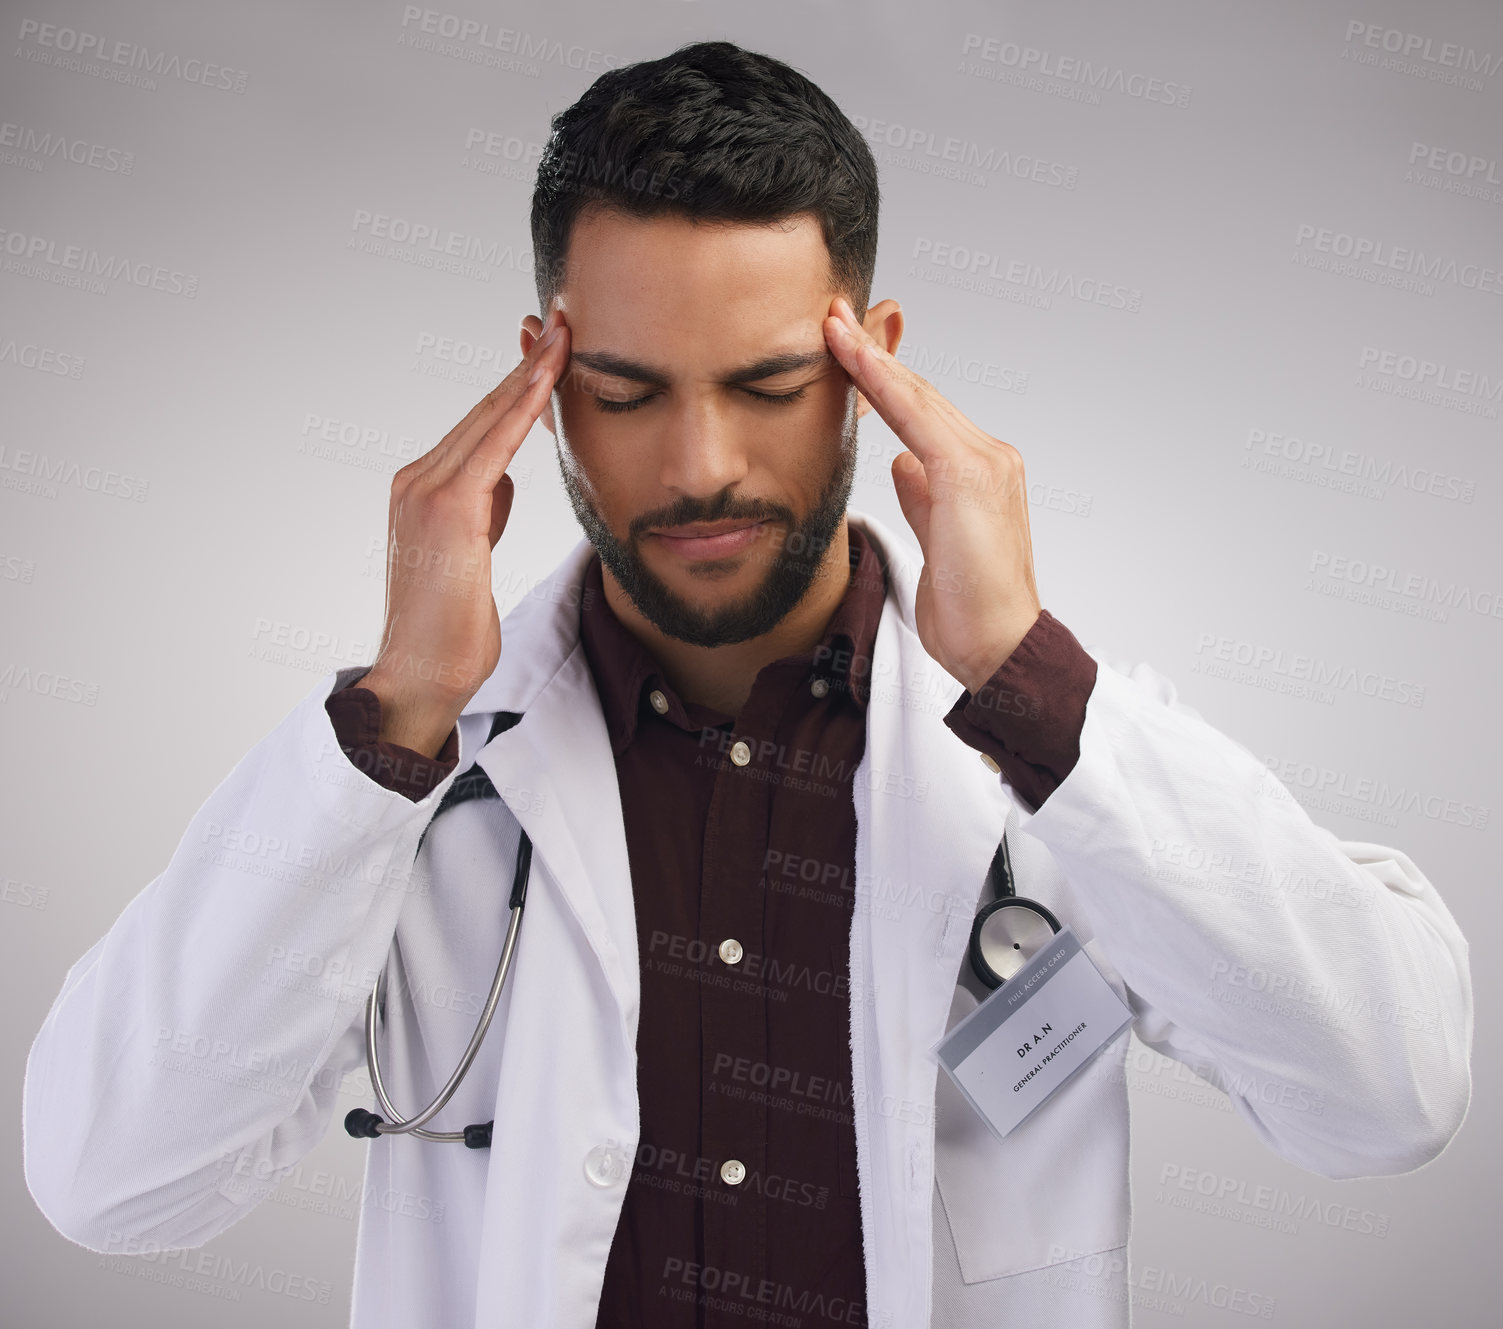 Buy stock photo Shot of a handsome young doctor standing alone in the studio and suffering from a headache